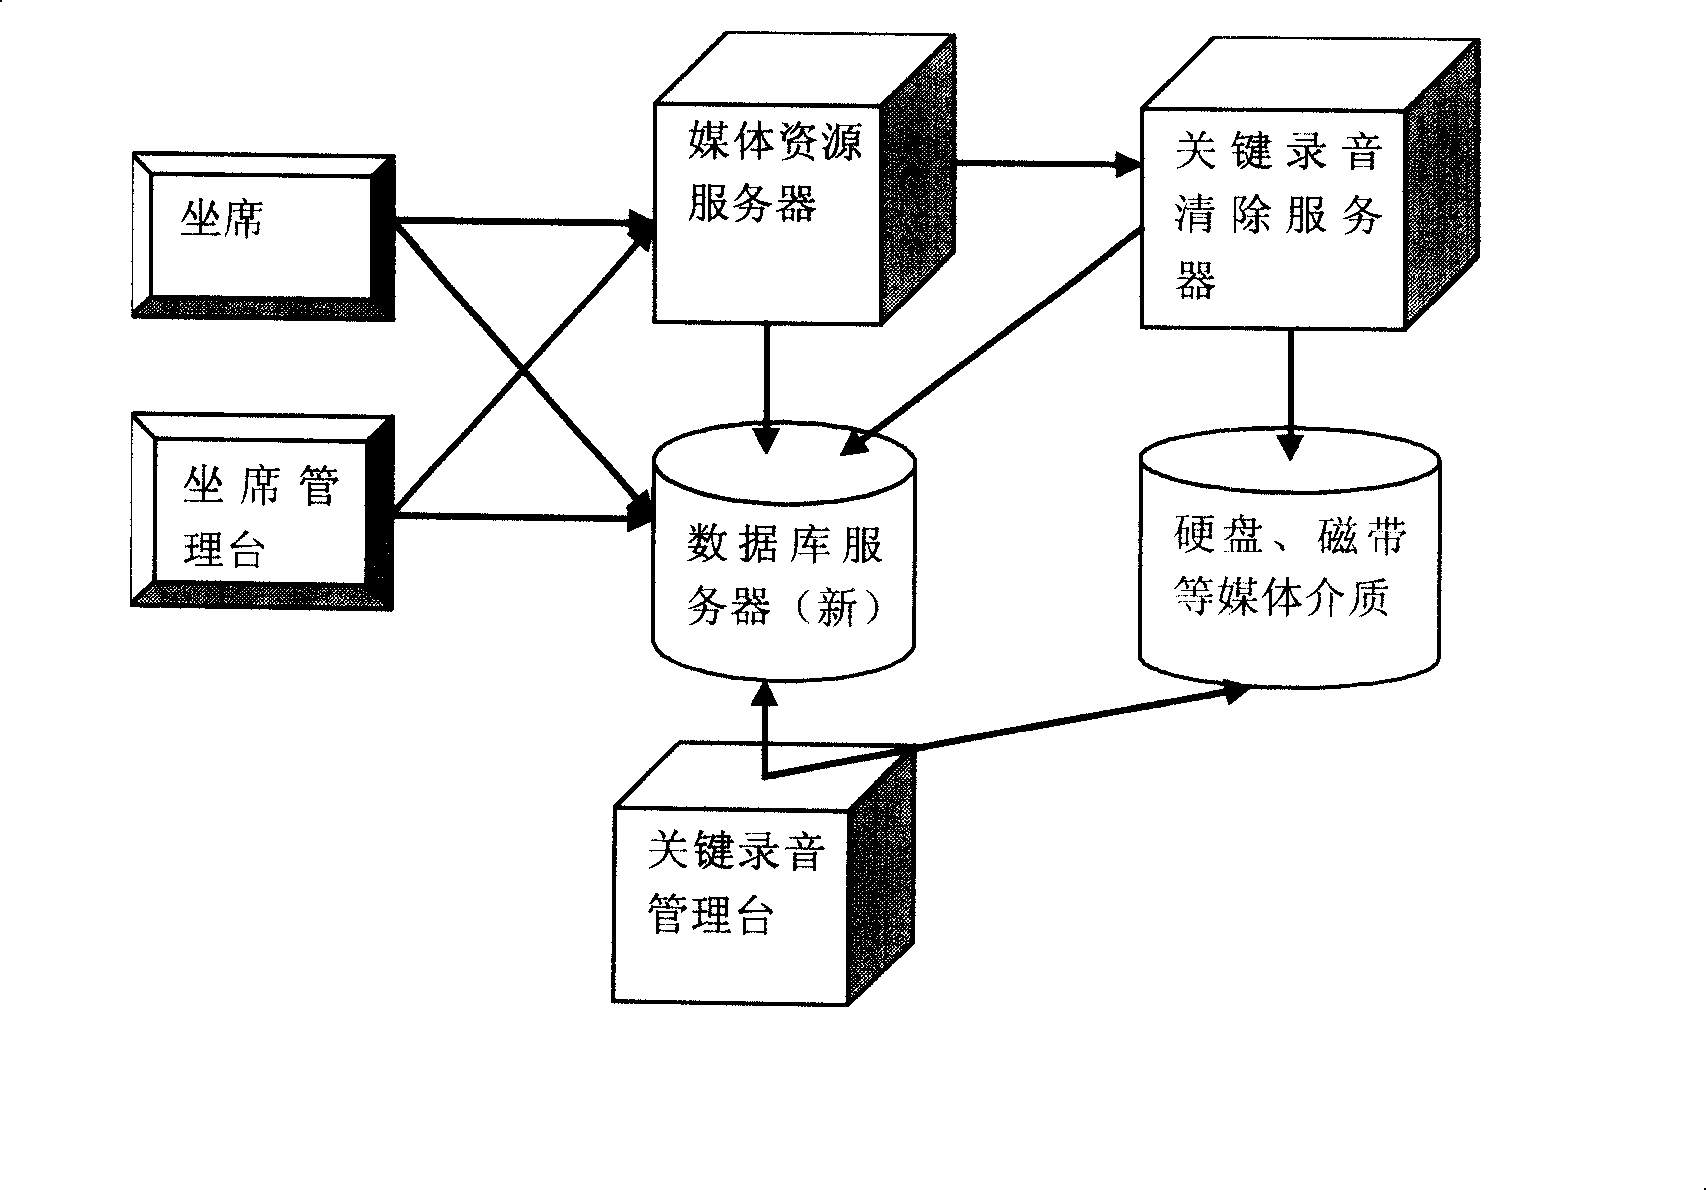 Recording file backup system and method